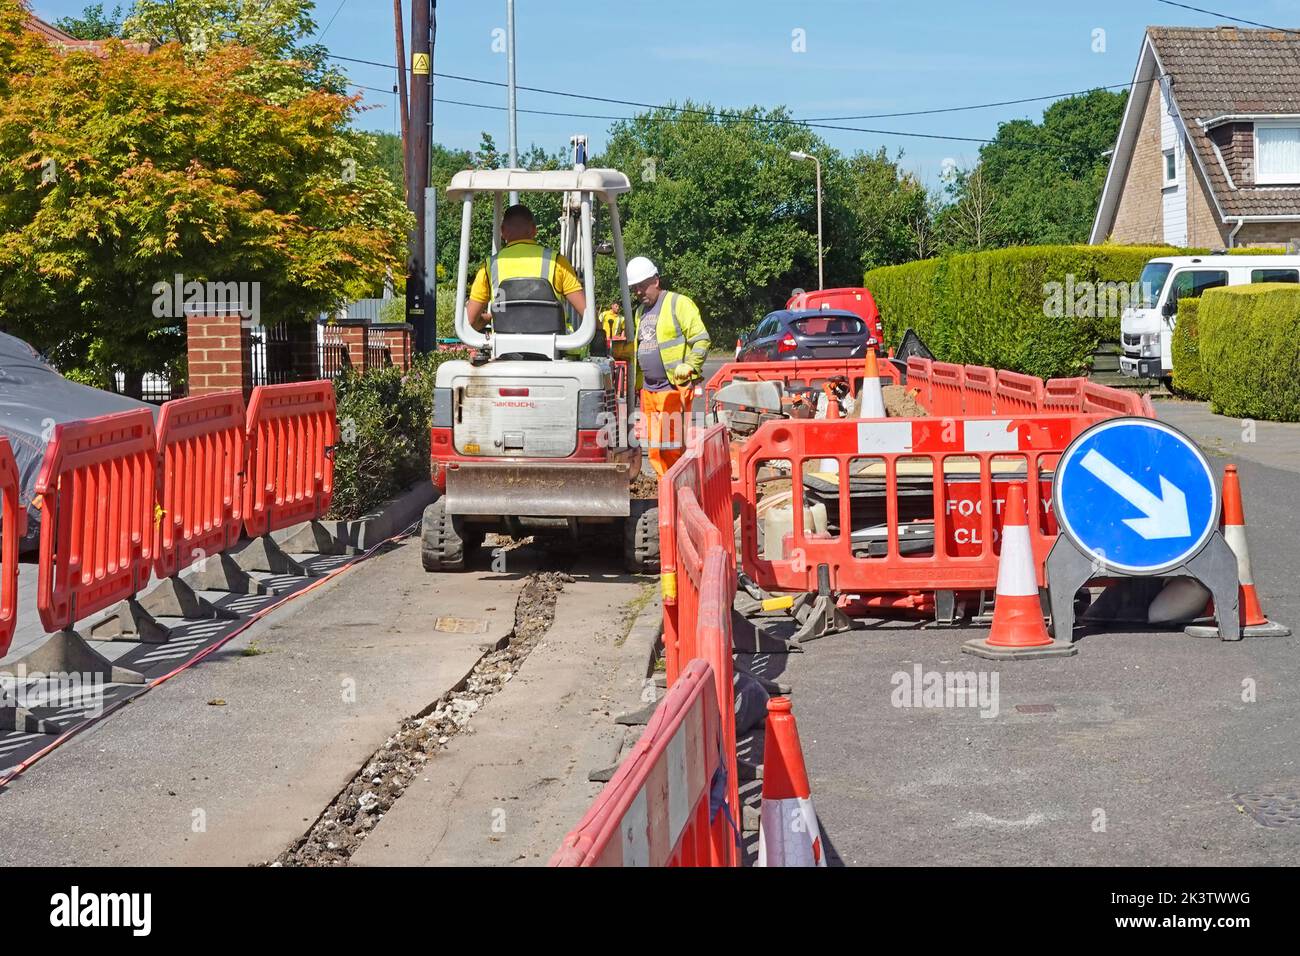 Red road works plastic safety barriers restricting home owners driveway access mini excavator digging broadband infrastructure trench in pavement UK Stock Photo